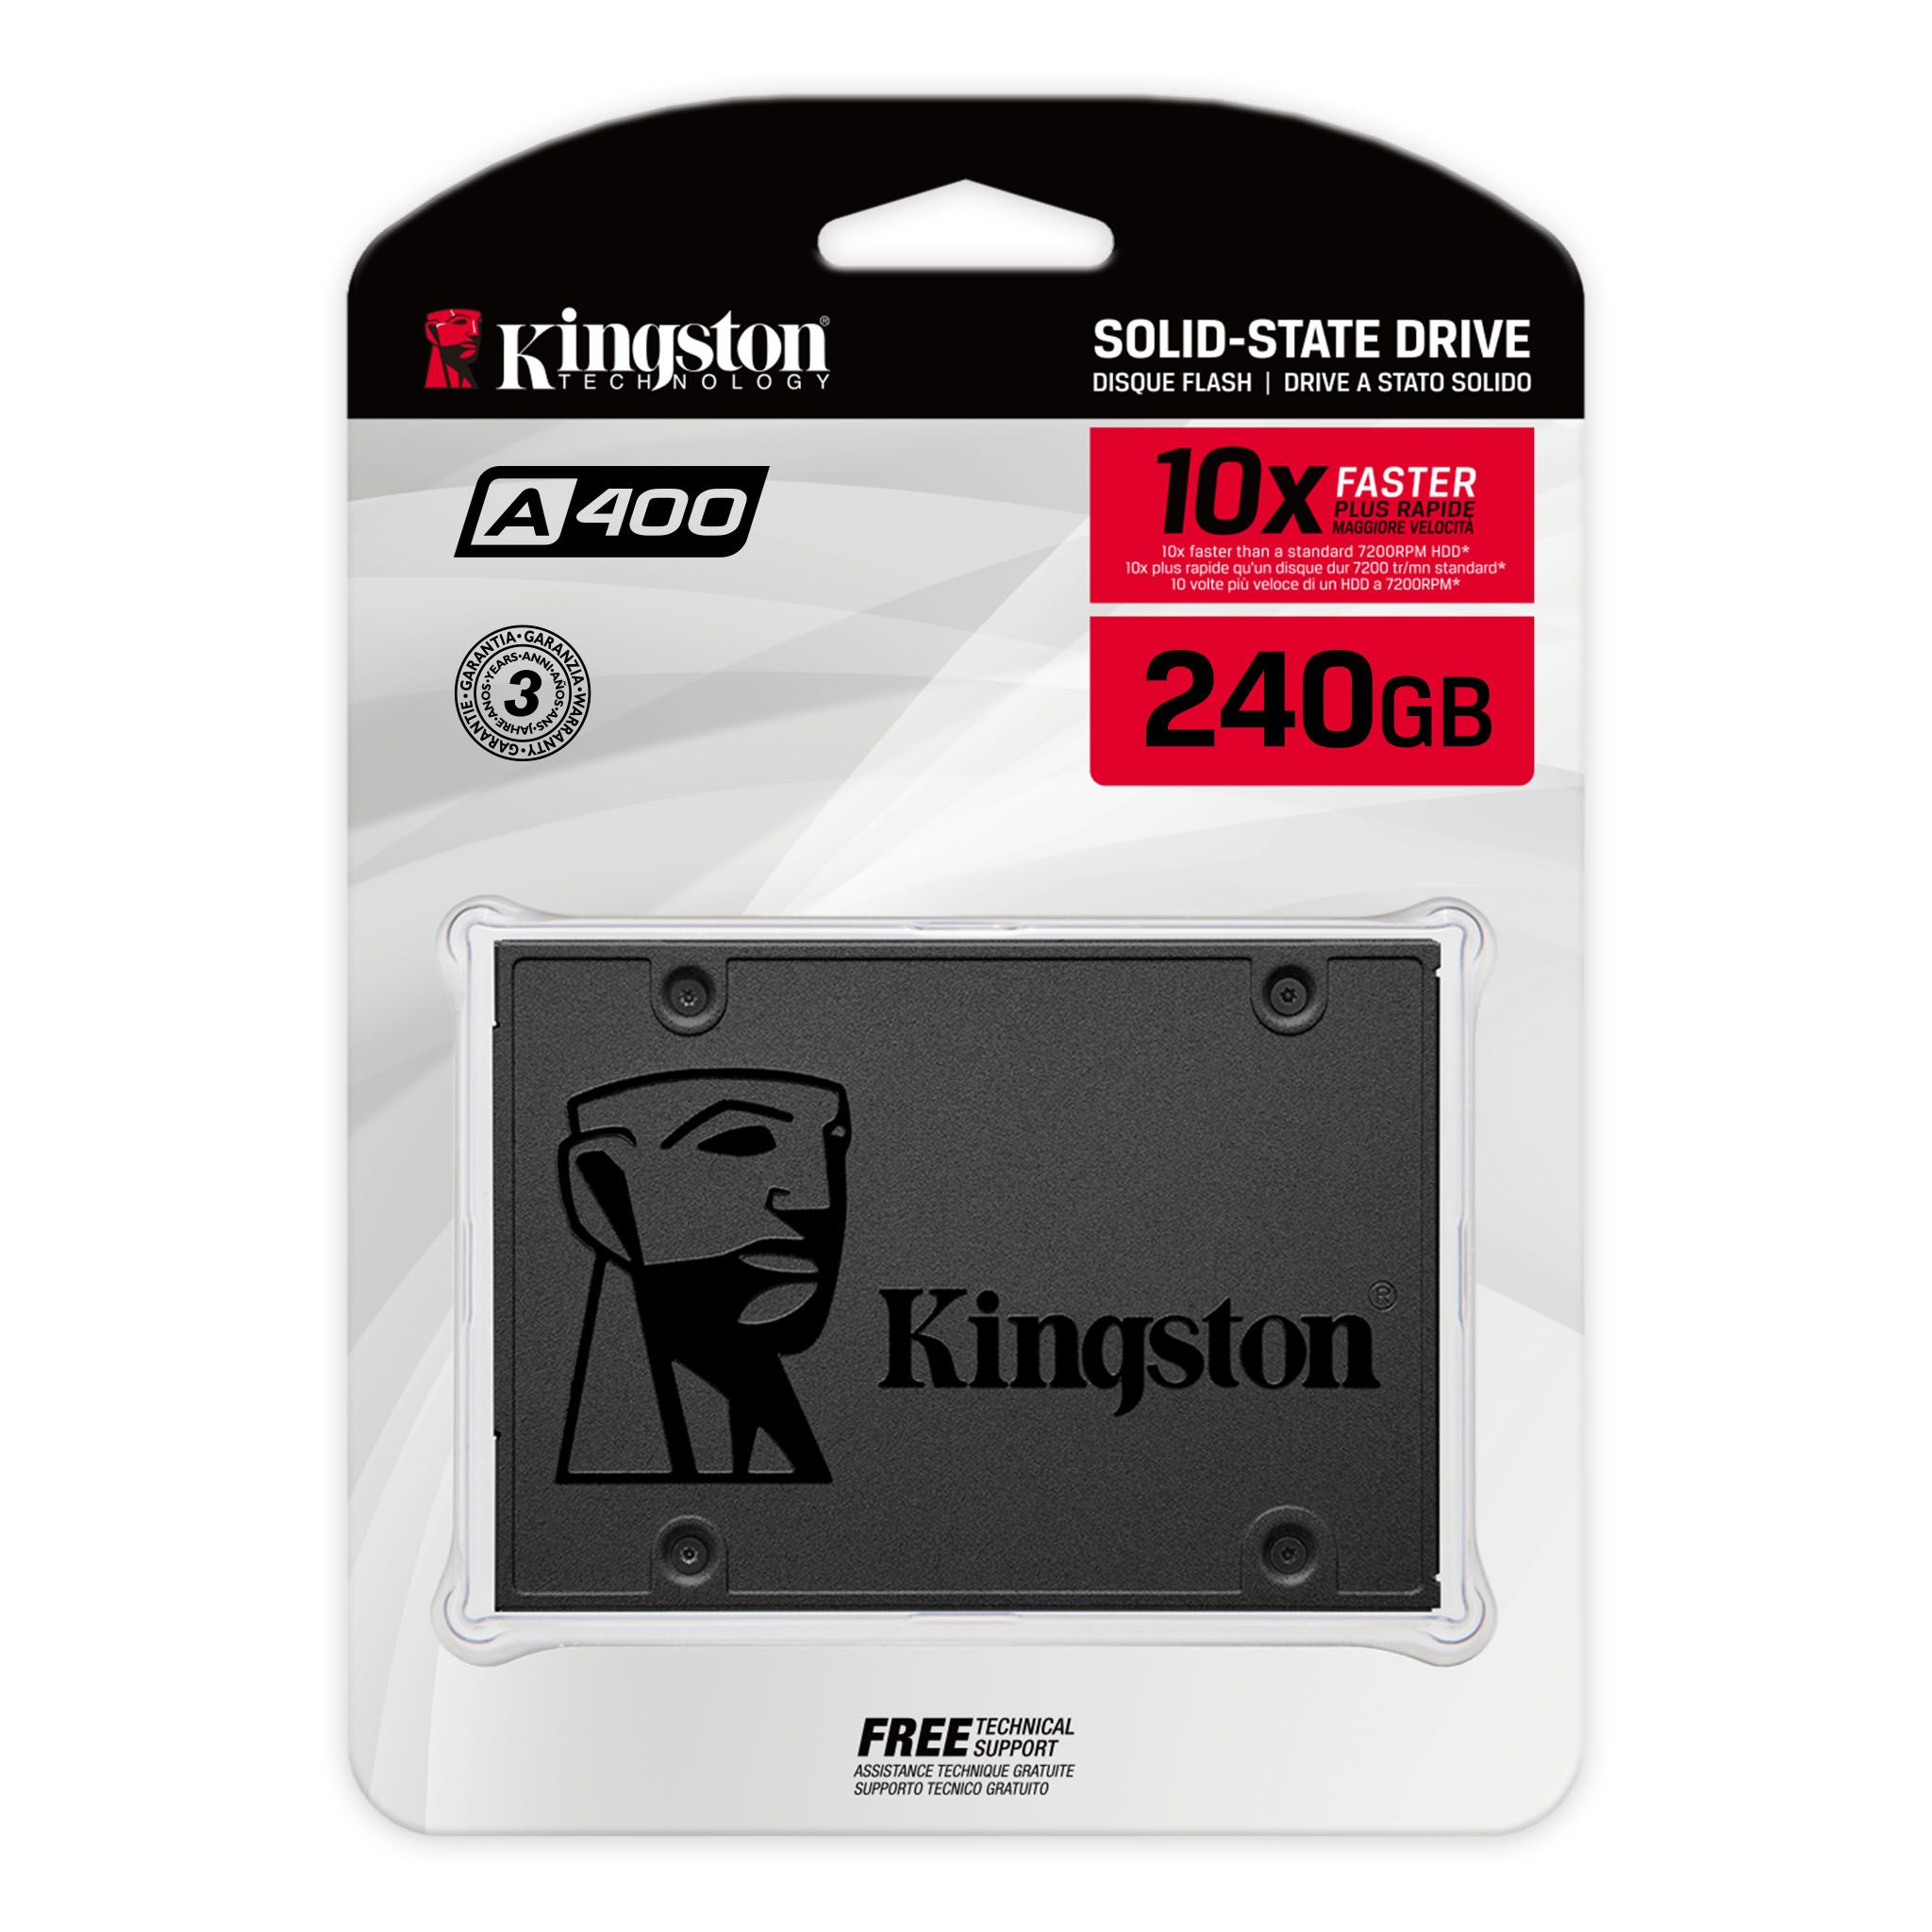 Kingston SSD A400 240gb Verpackung